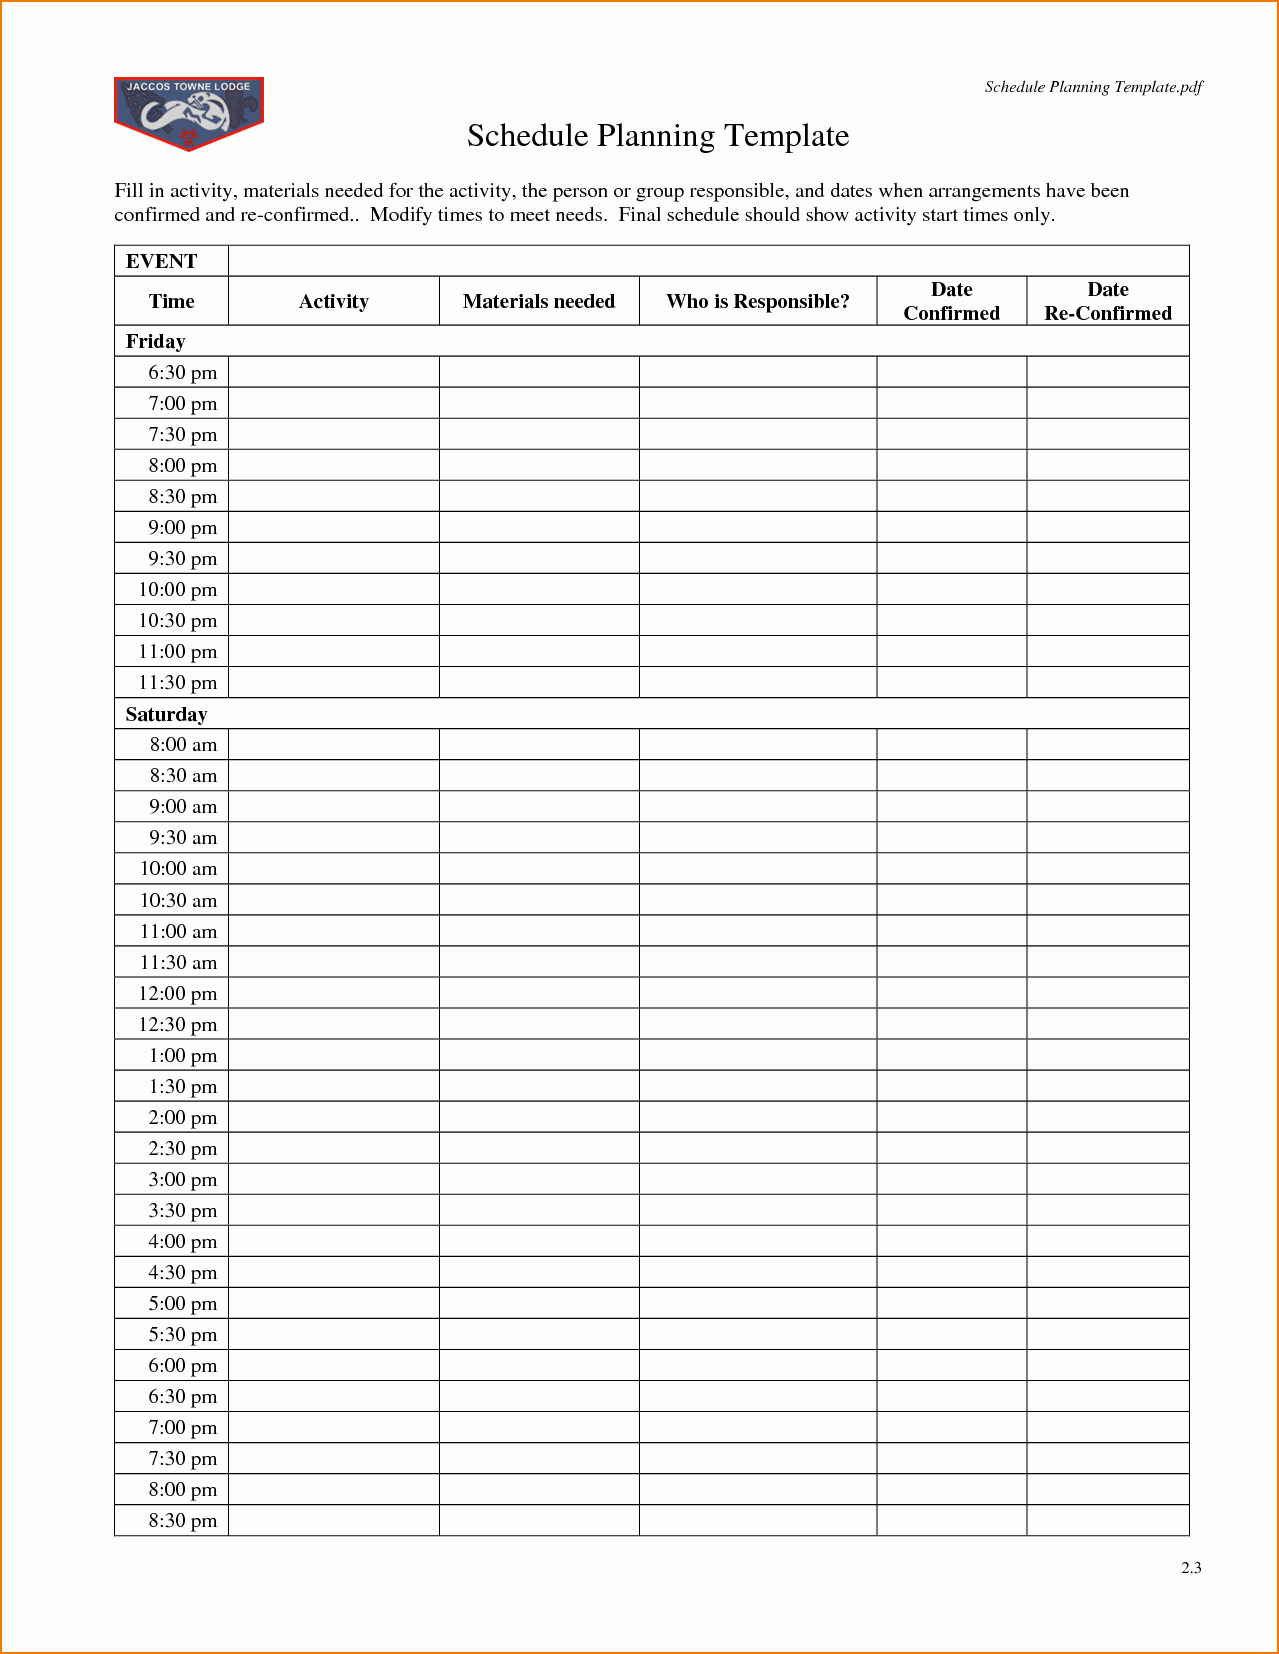 Weekly Schedule Template Pdf Awesome 5 Daily Schedule Template Pdf